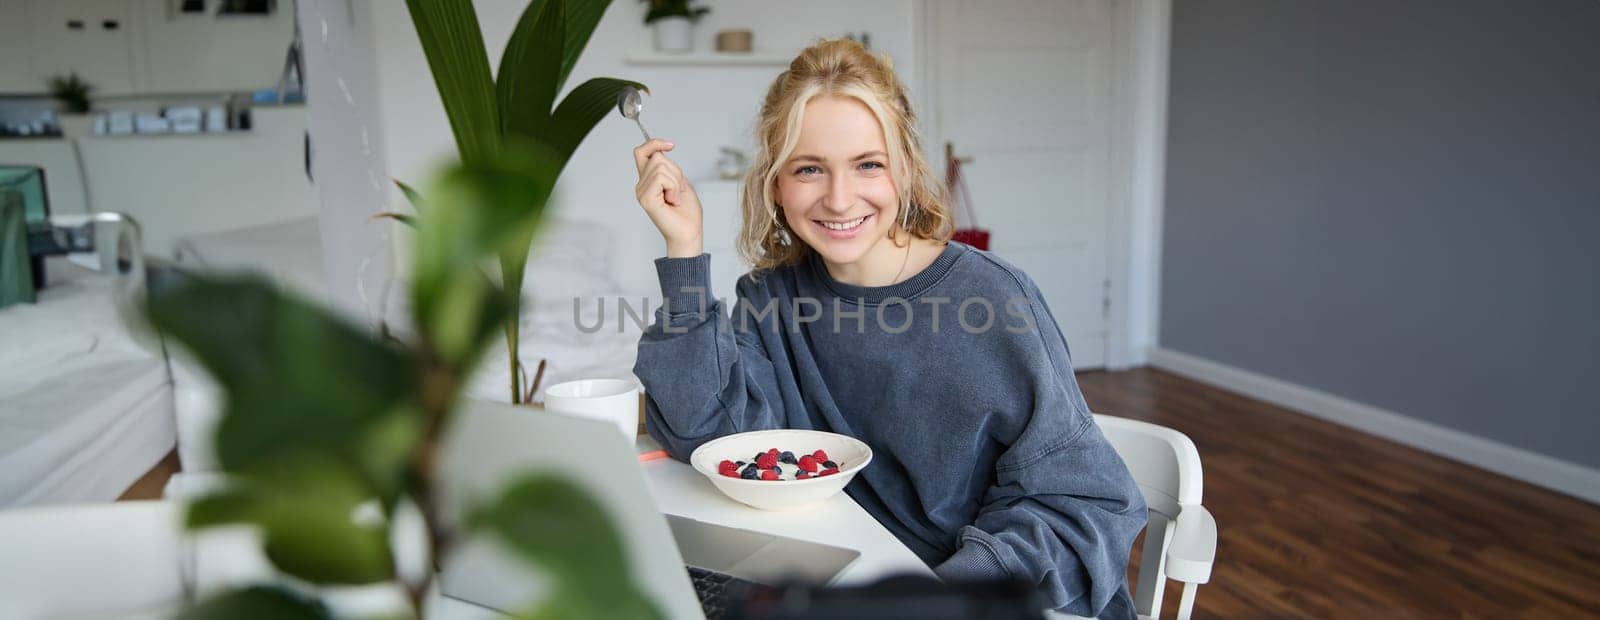 Portrait of young smiling woman, sitting in room, watching videos on laptop, eating lunch or breakfast, healthy meal.